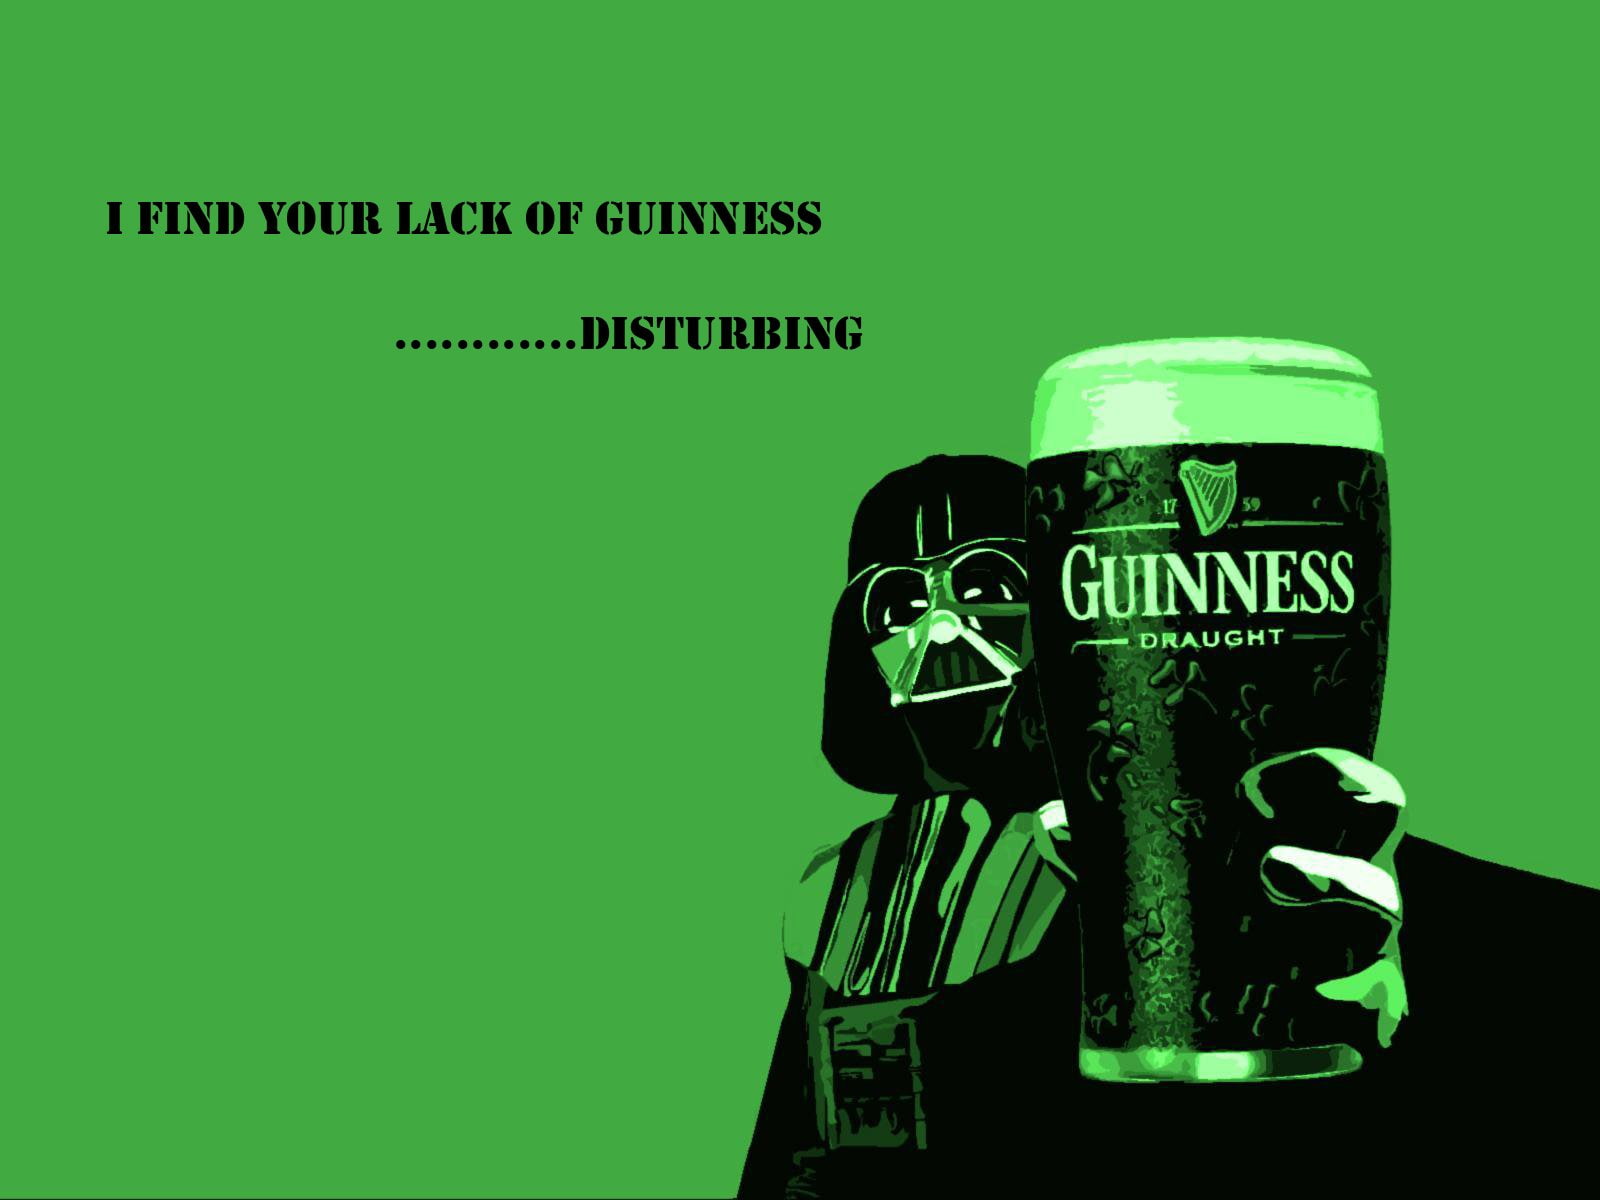 Star Wars, Beer, Darth Vader, Guinness, Quote, St. Patrick's Day